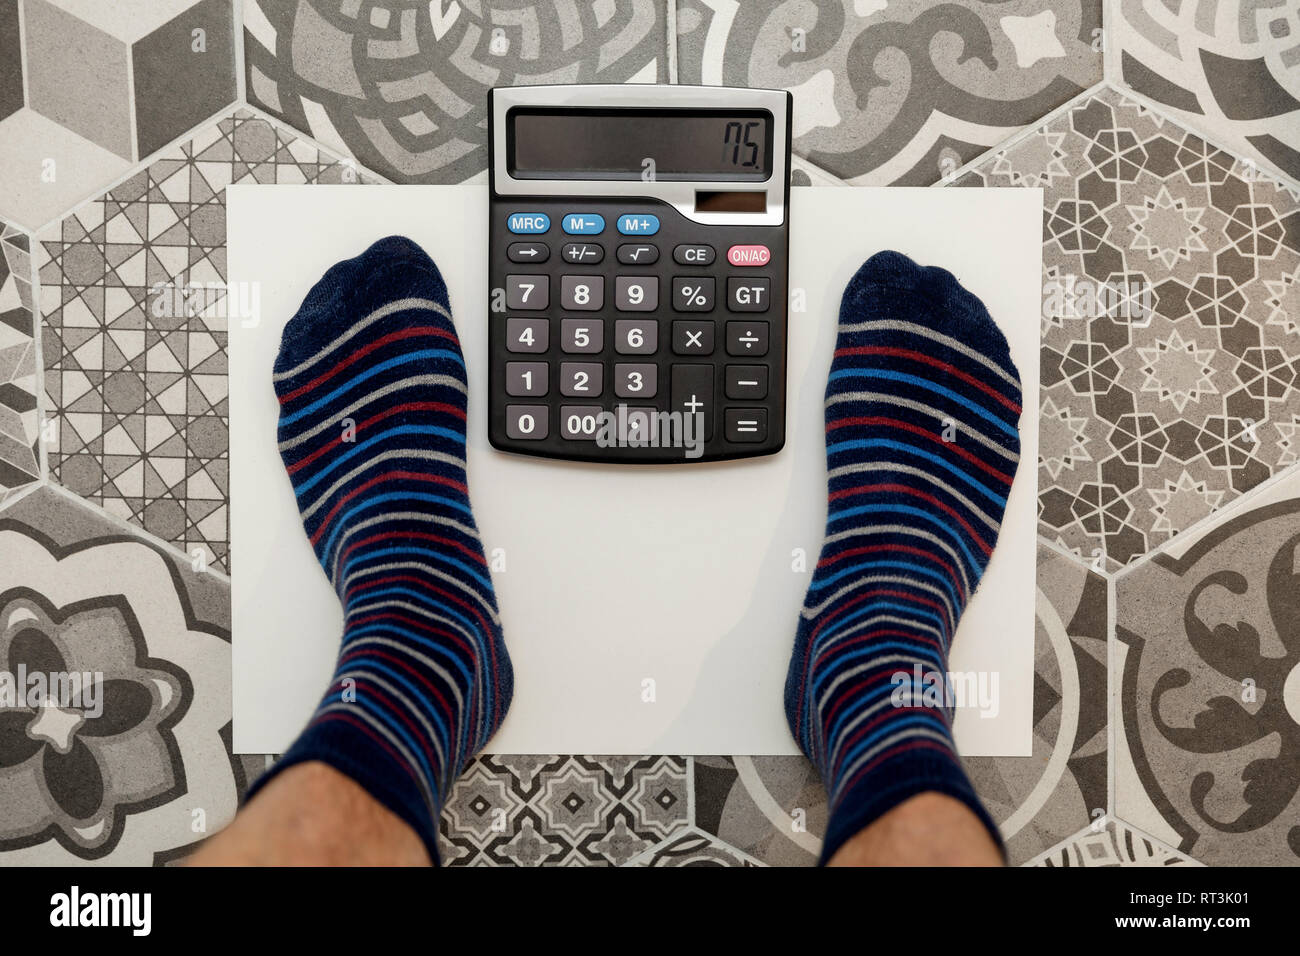 ideal weight calculator concept Stock Photo